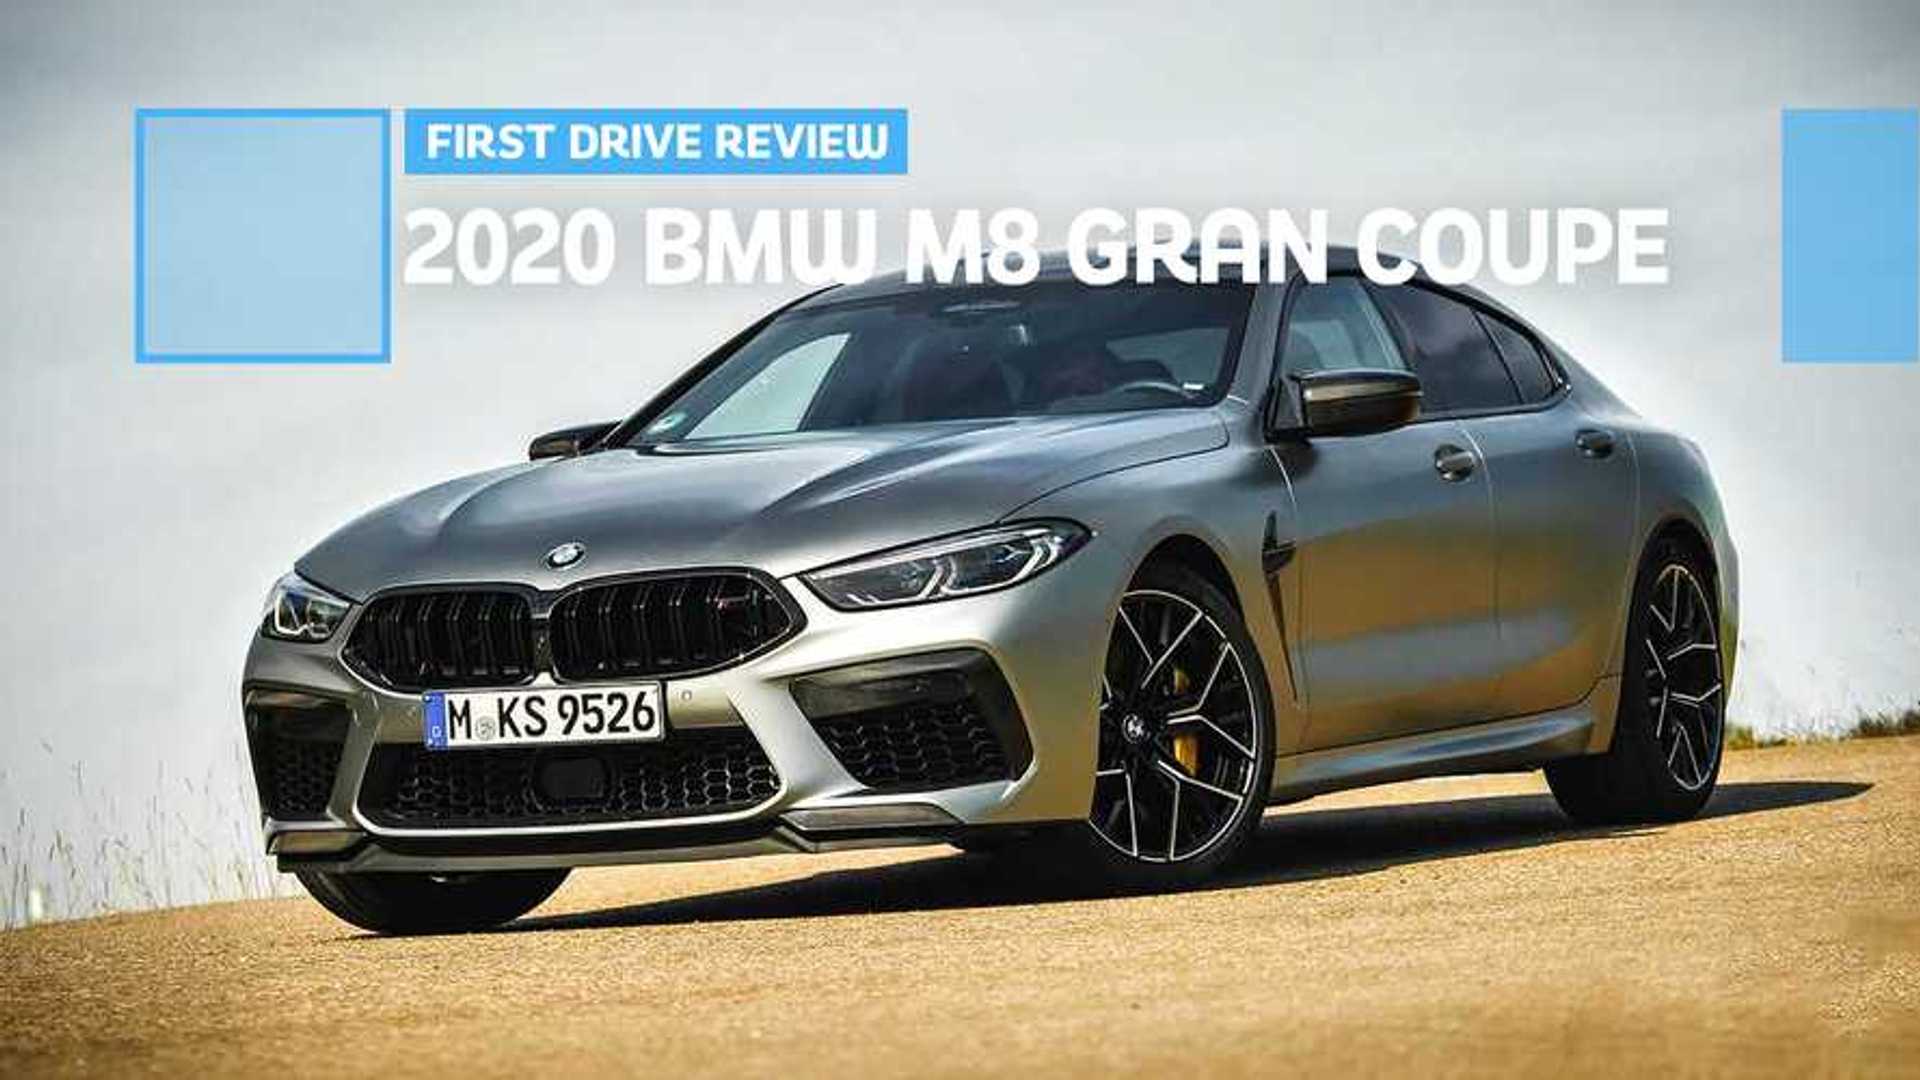 2020 BMW M8 Gran Coupe First Drive Review: Better Than The Competition?